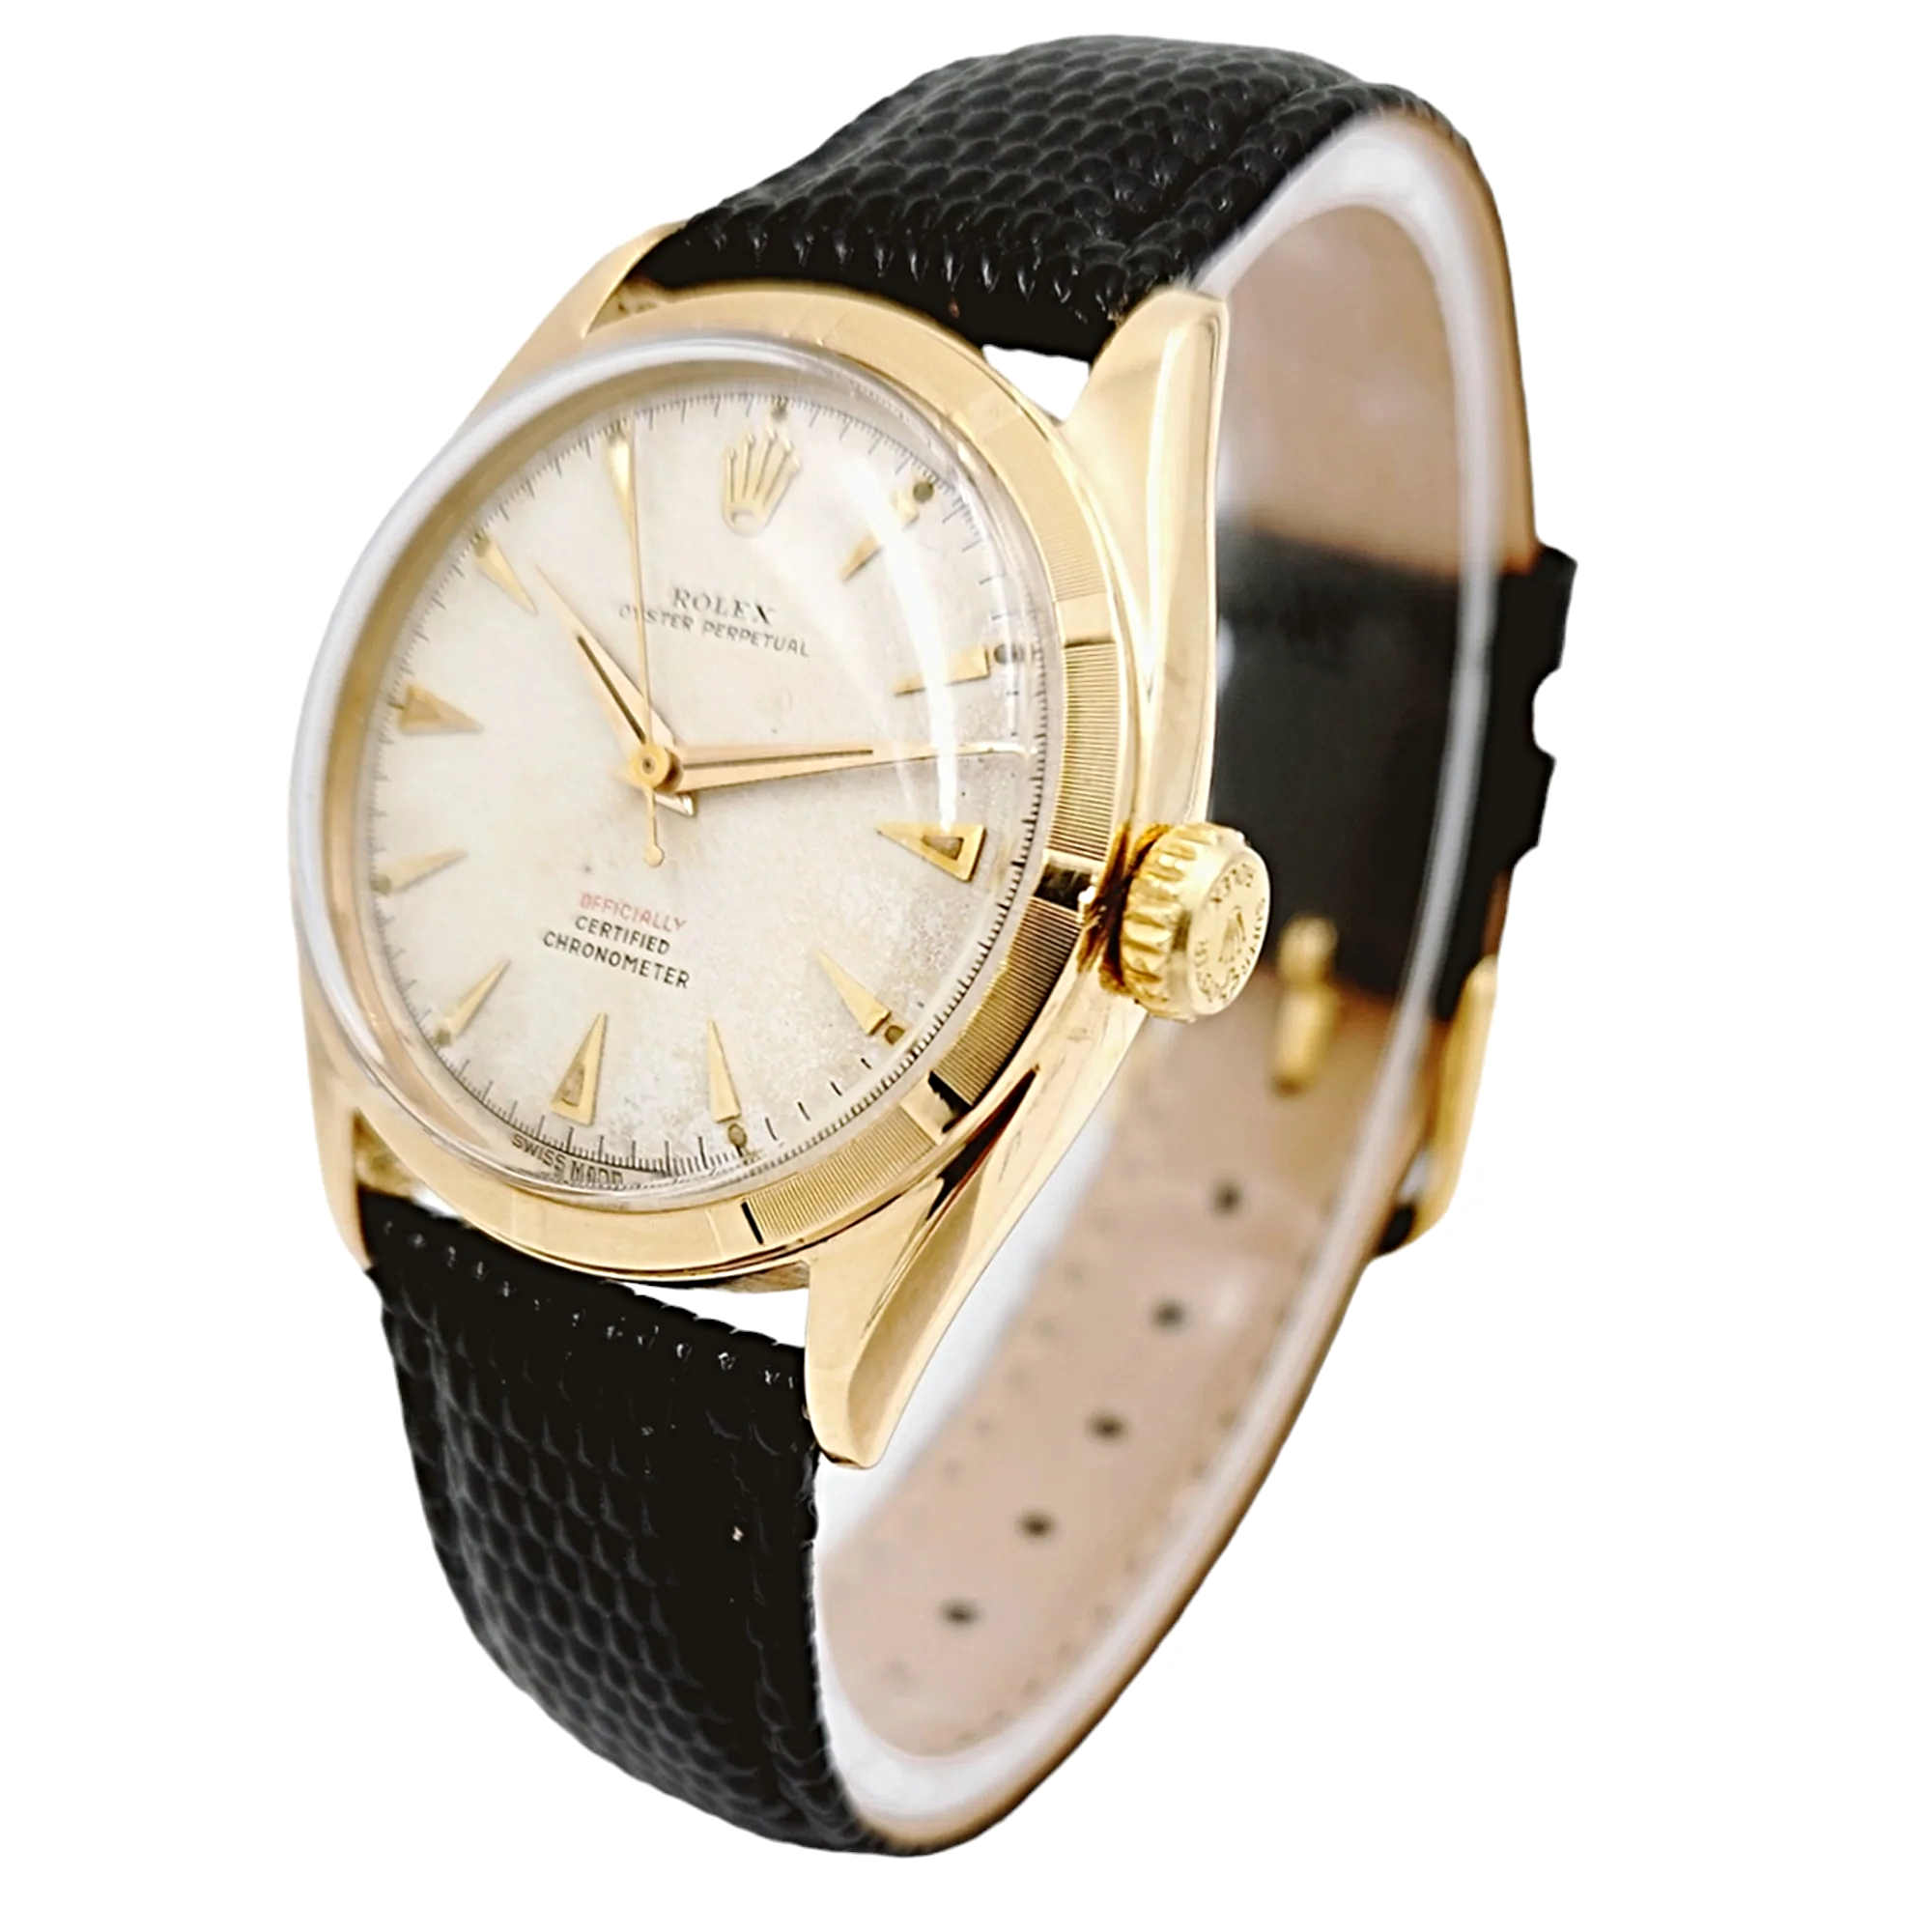 1958 Men's Rolex 34mm Vintage Oyster Perpetual 18K Yellow Gold Watch with Cream Dial and Black Leather Strap. (Pre-Owned 6085)